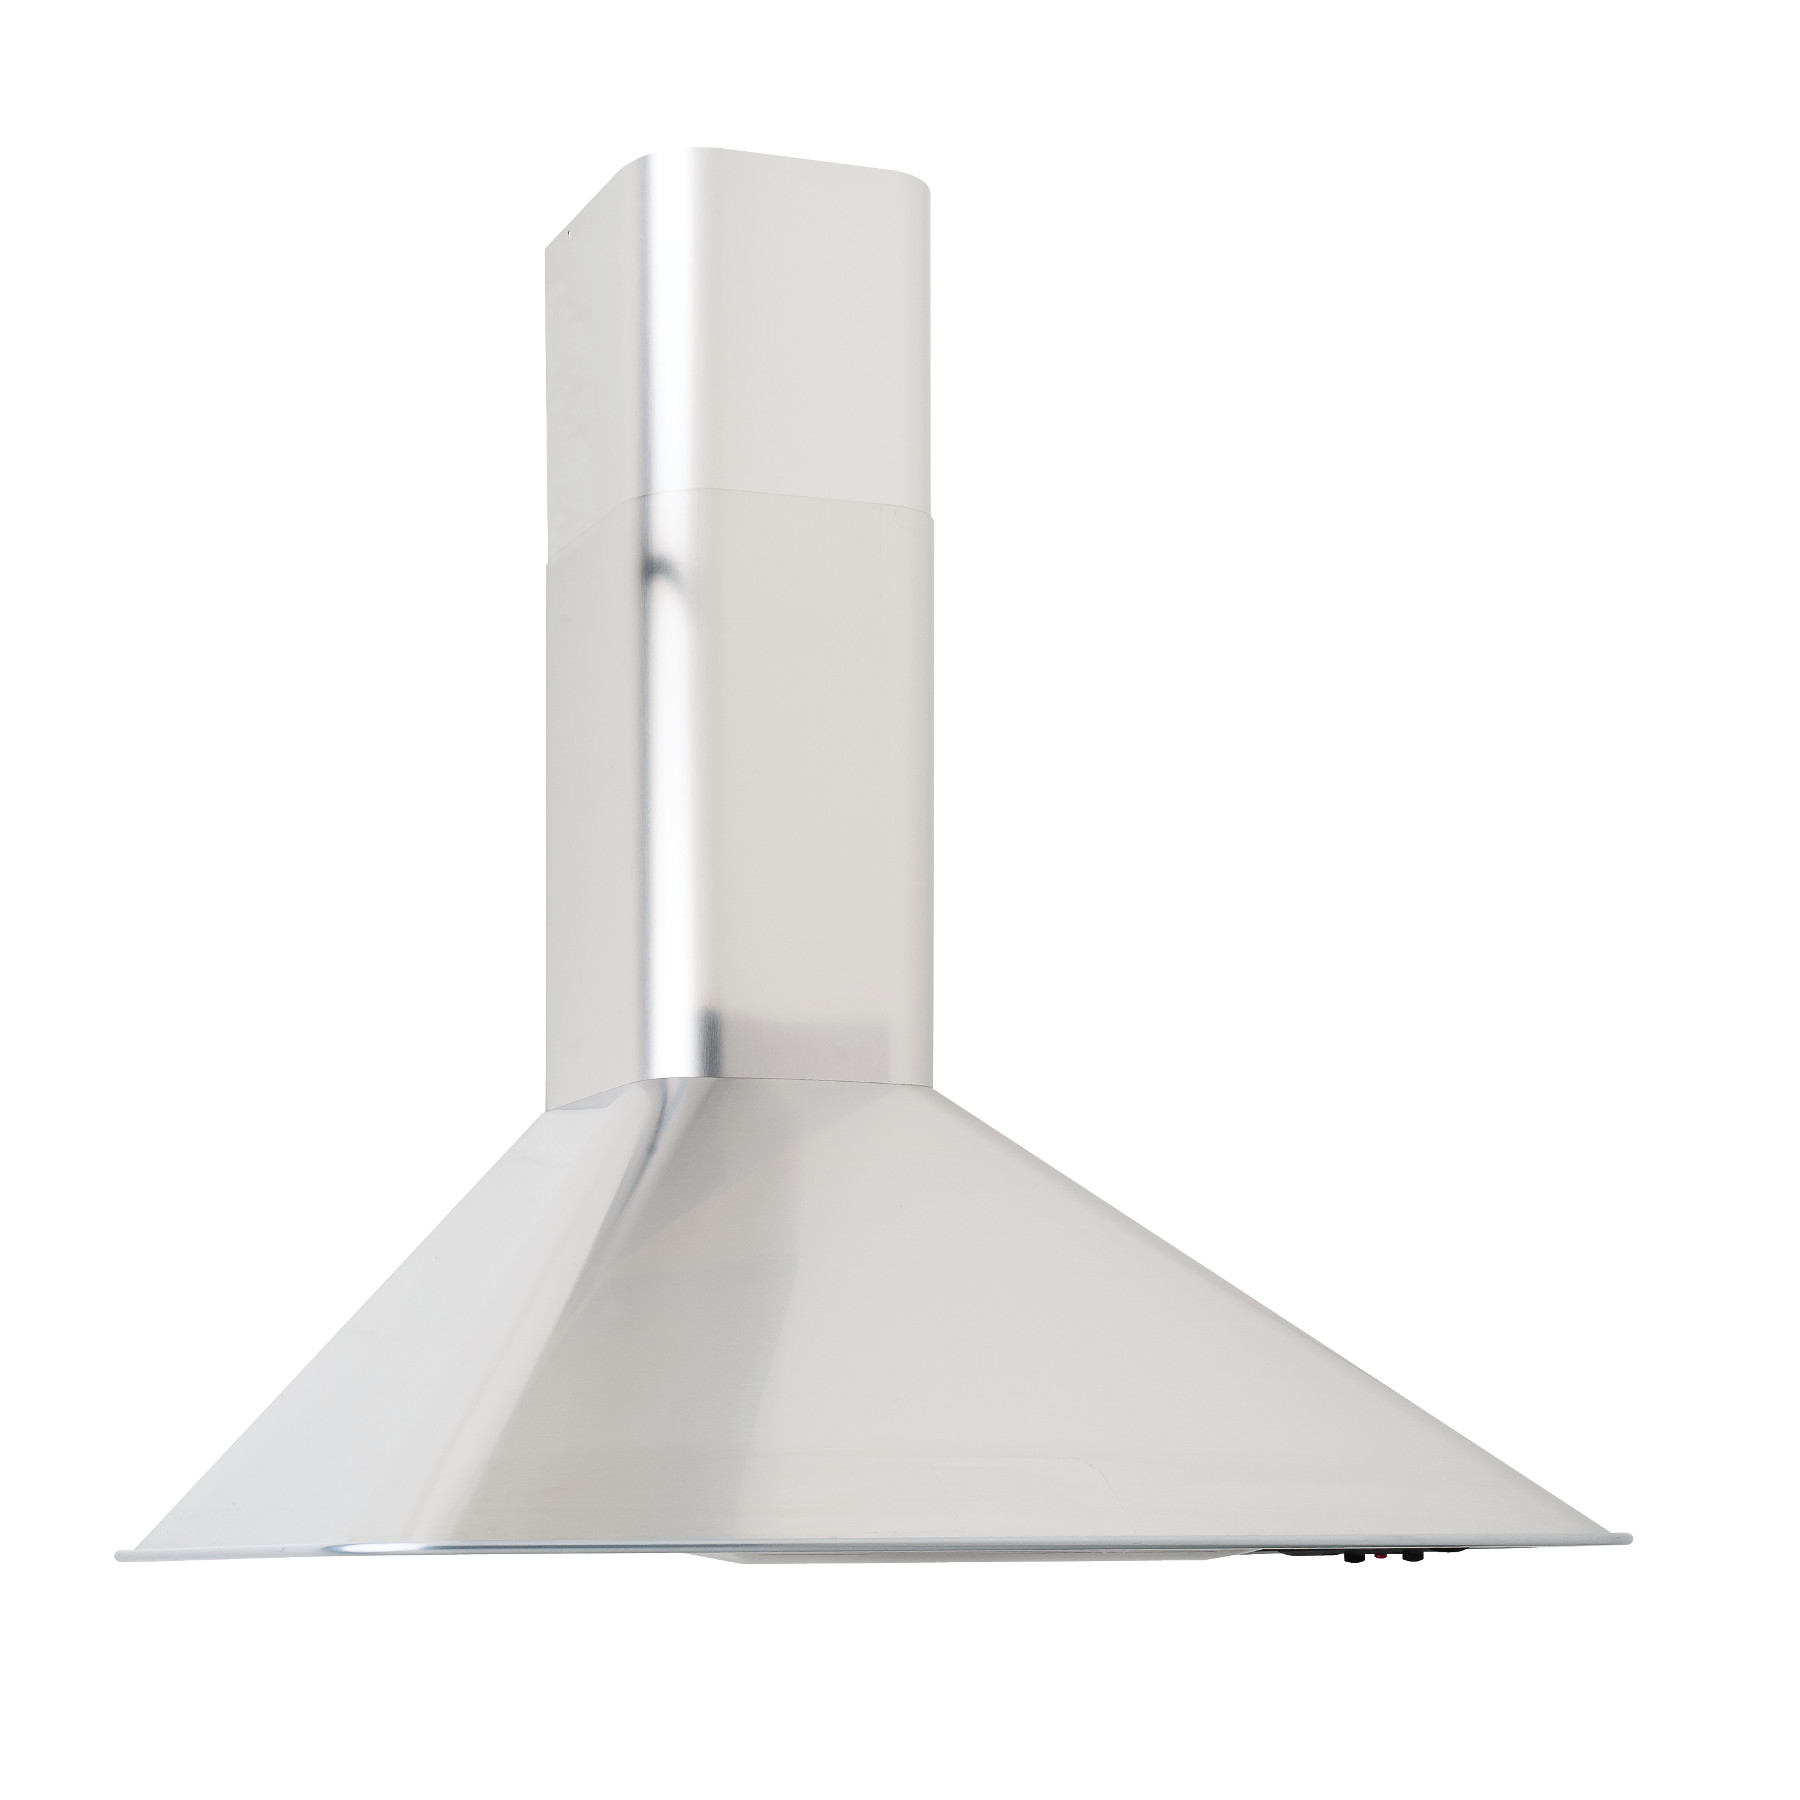 DISCONTINUED-Broan® 30-Inch Wall-Mount Chimney Range Hood, ENERGY STAR®, 290 CFM, Stainless Steel